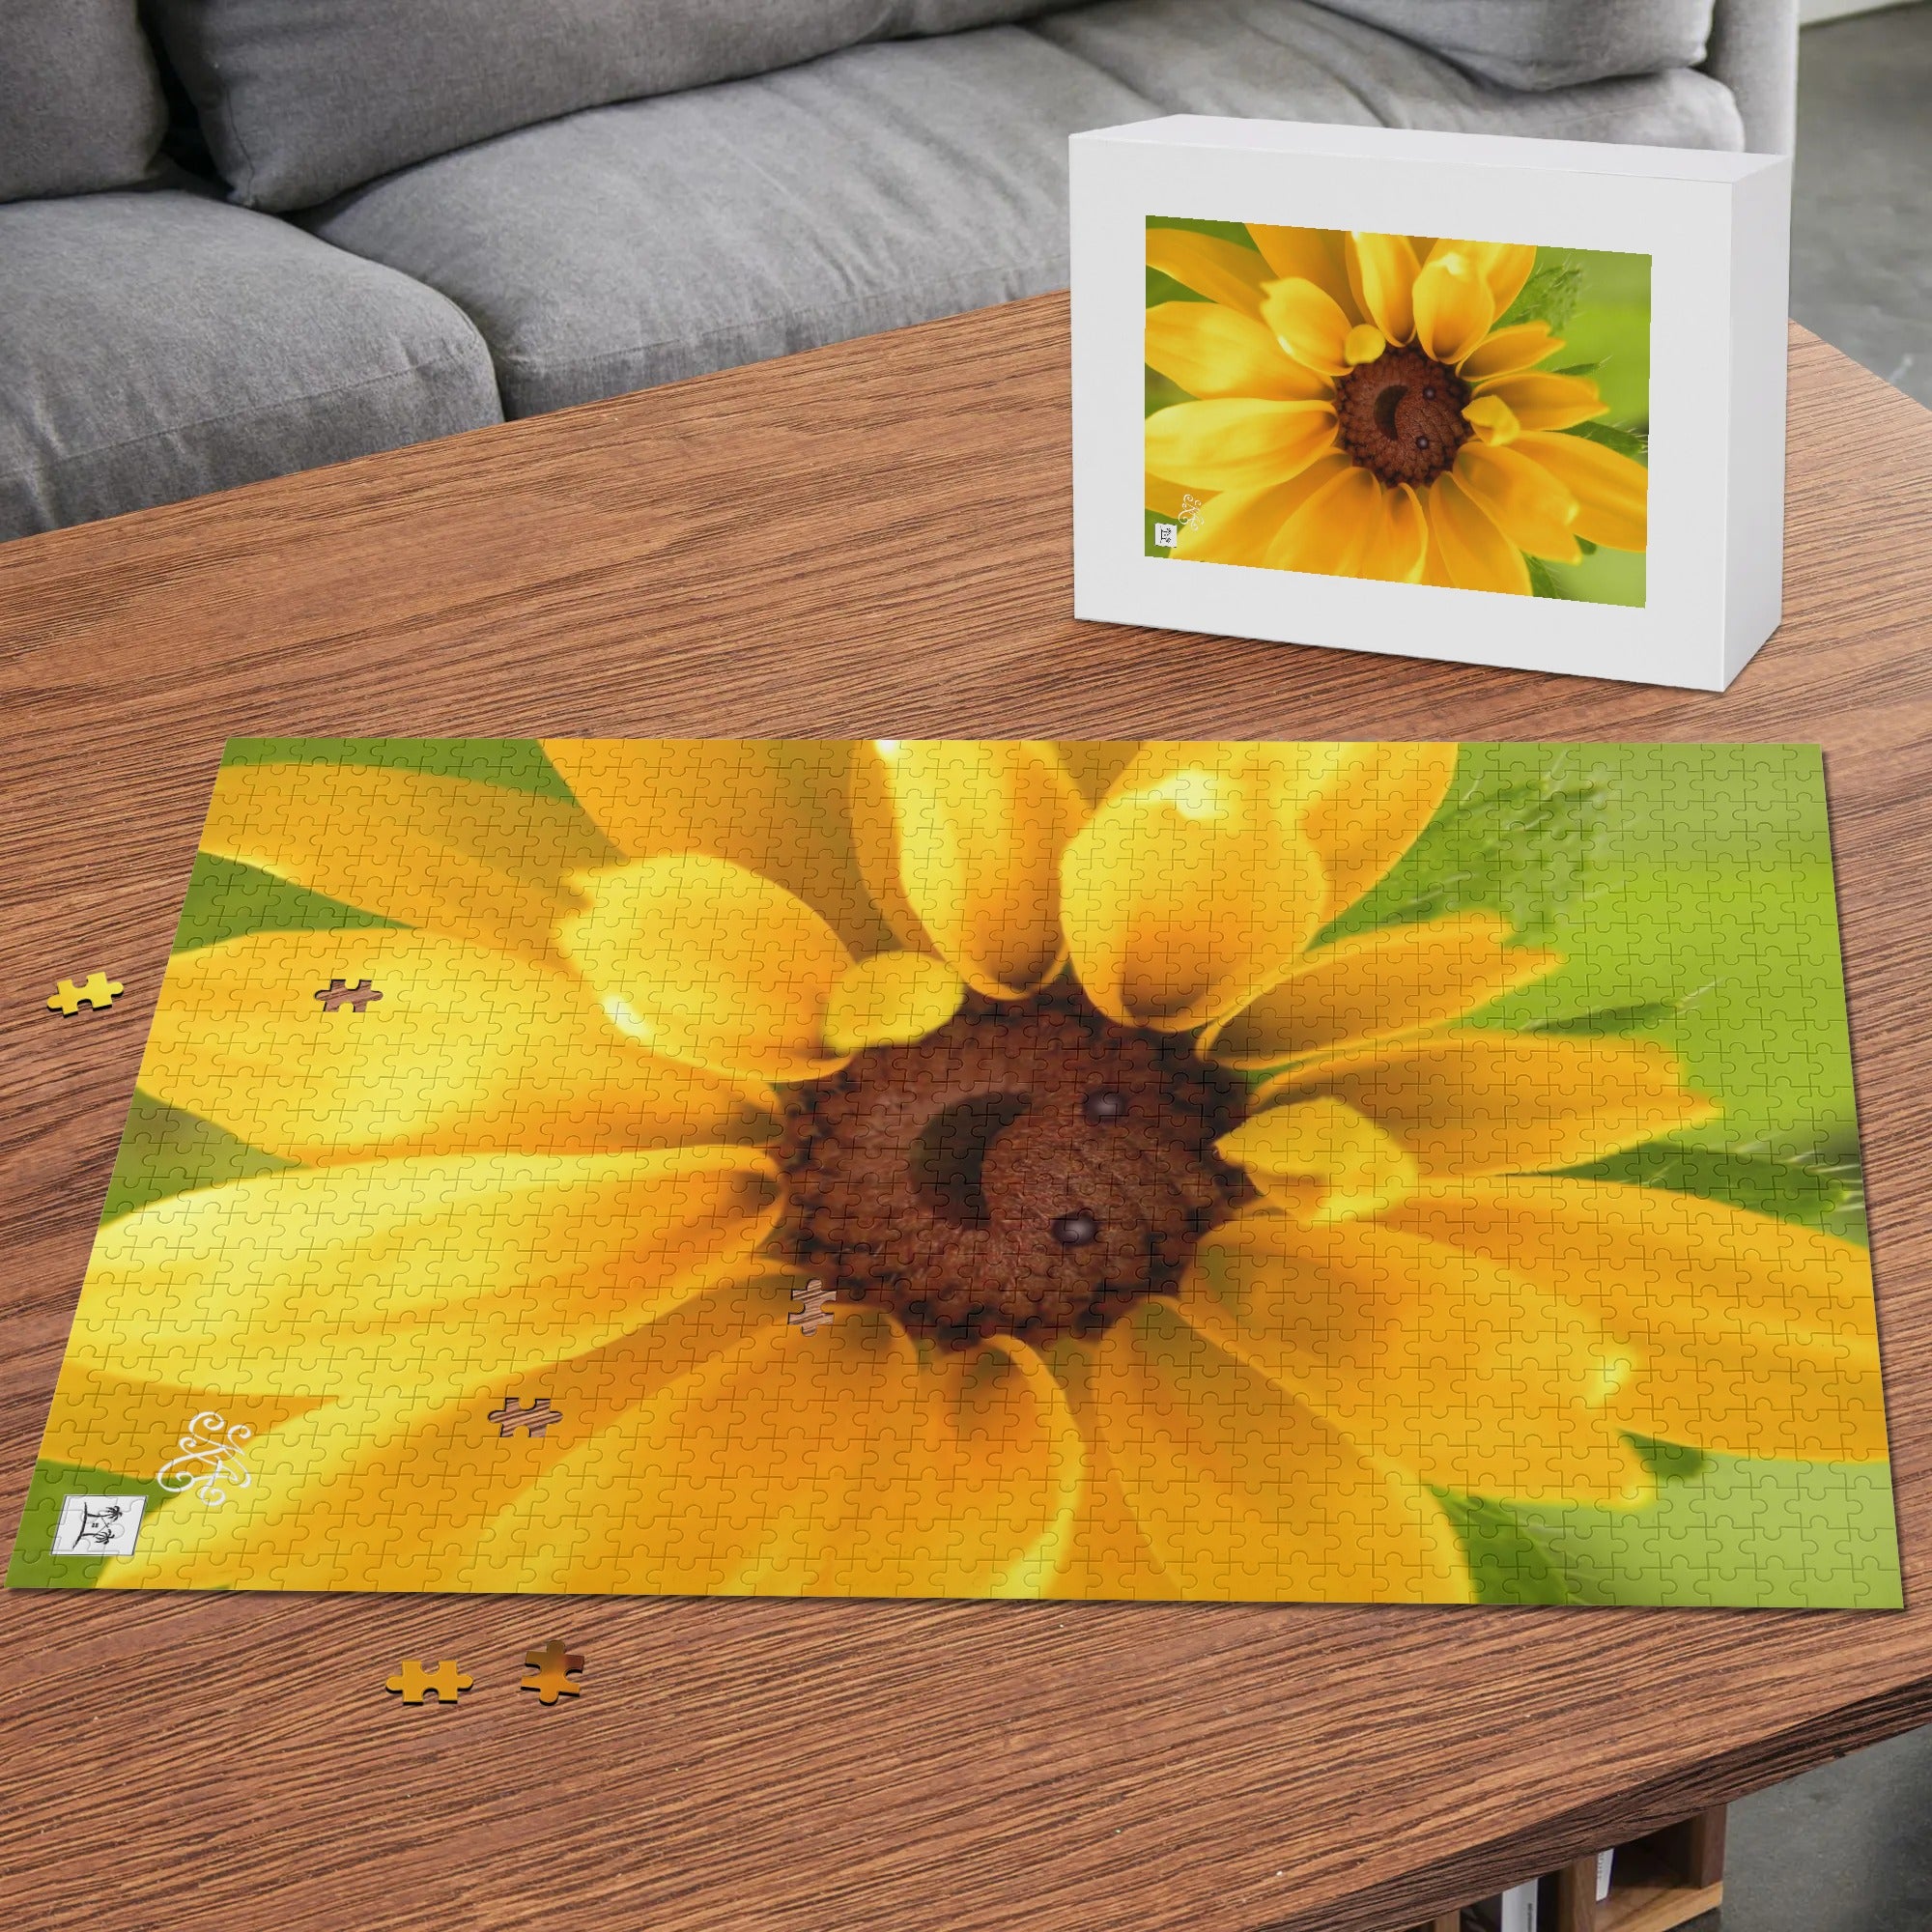 Wooden Jigsaw Puzzle (1000 Pcs) - A Sunny Disposition